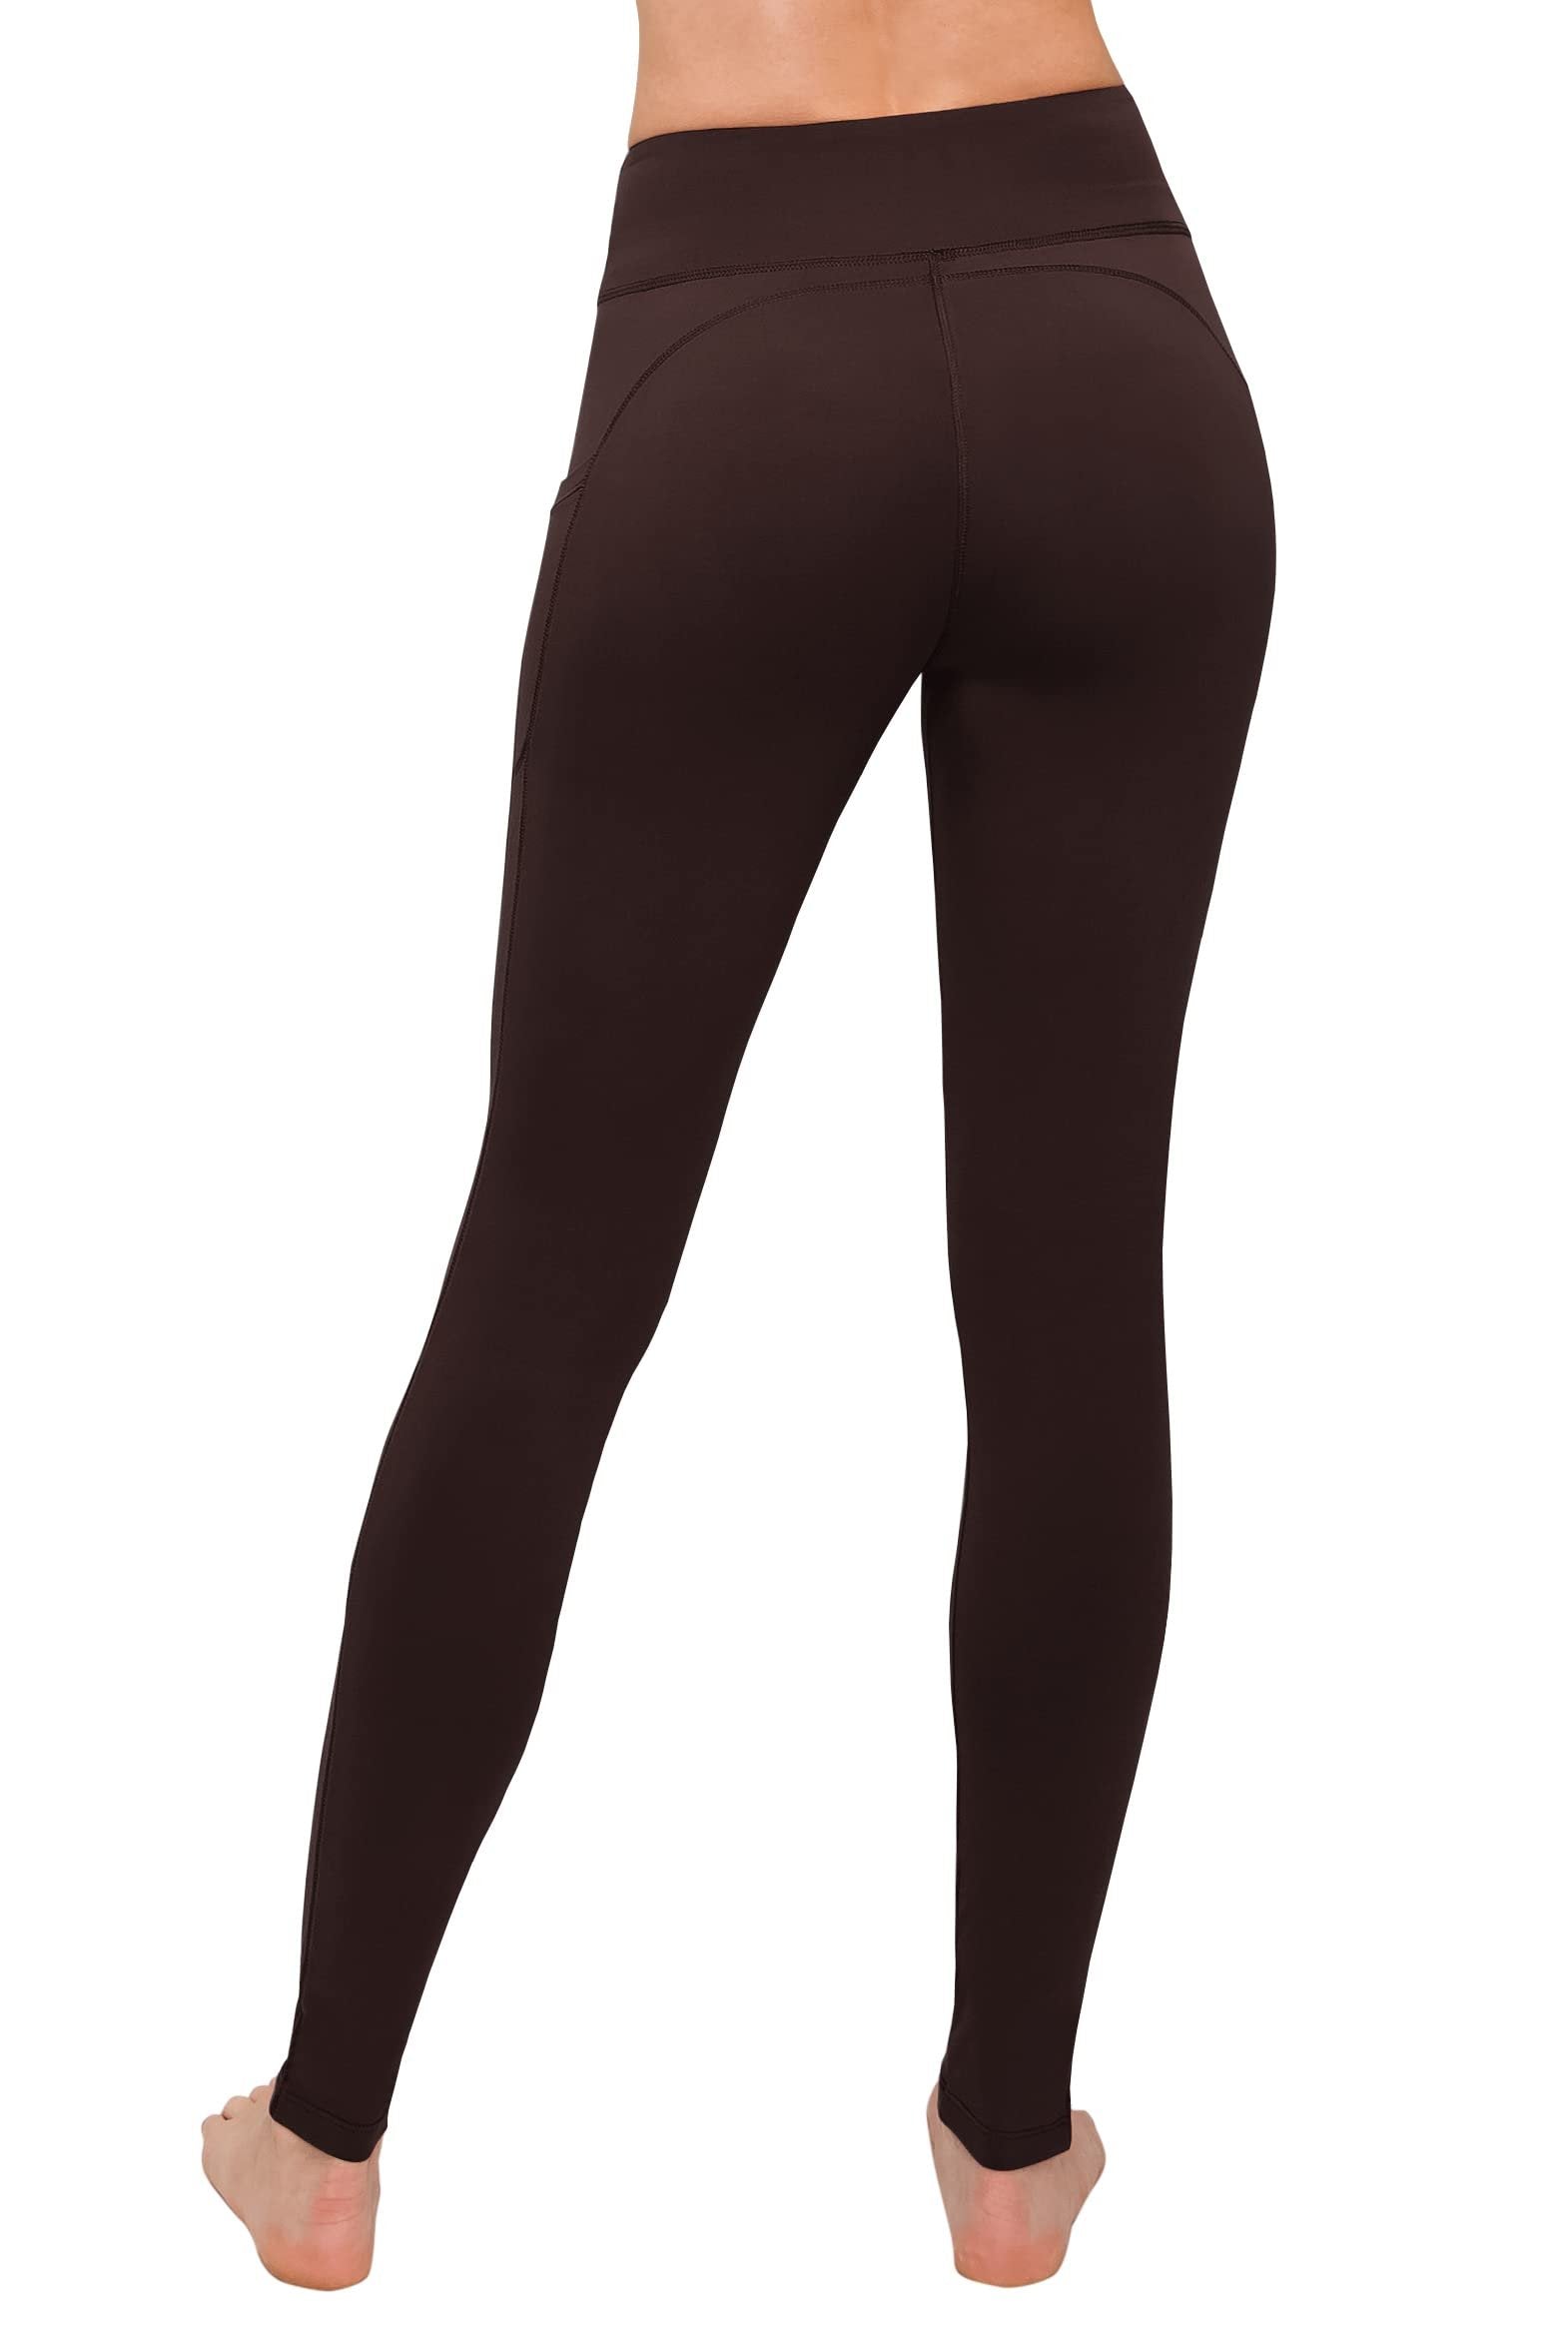 Brown Satina High Waisted Leggings with Pockets, 3 Waistband, One Size - Workout & Yoga for Women